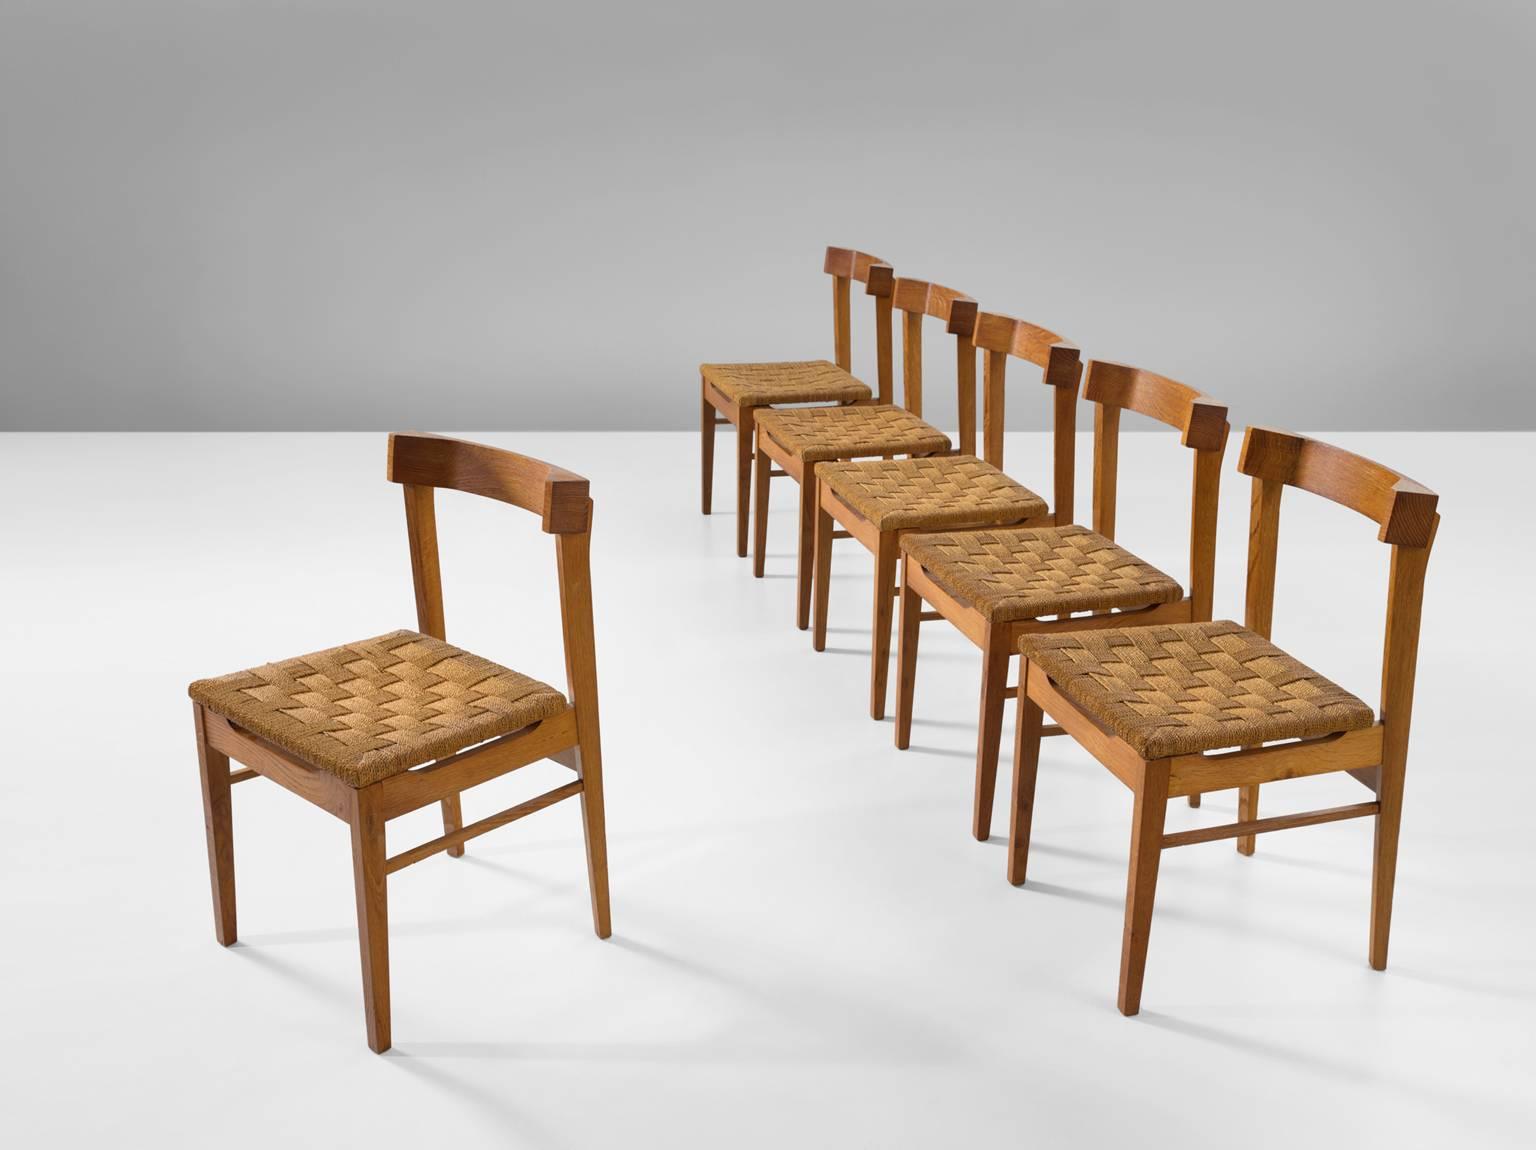 Six chairs, oak and rope, The Netherlands, 1960.

These six chairs are executed in rope and wonderfully aged oak. The chairs have a very solid and geometric backrest. The chairs are both functional and clear in their design, as is common of most